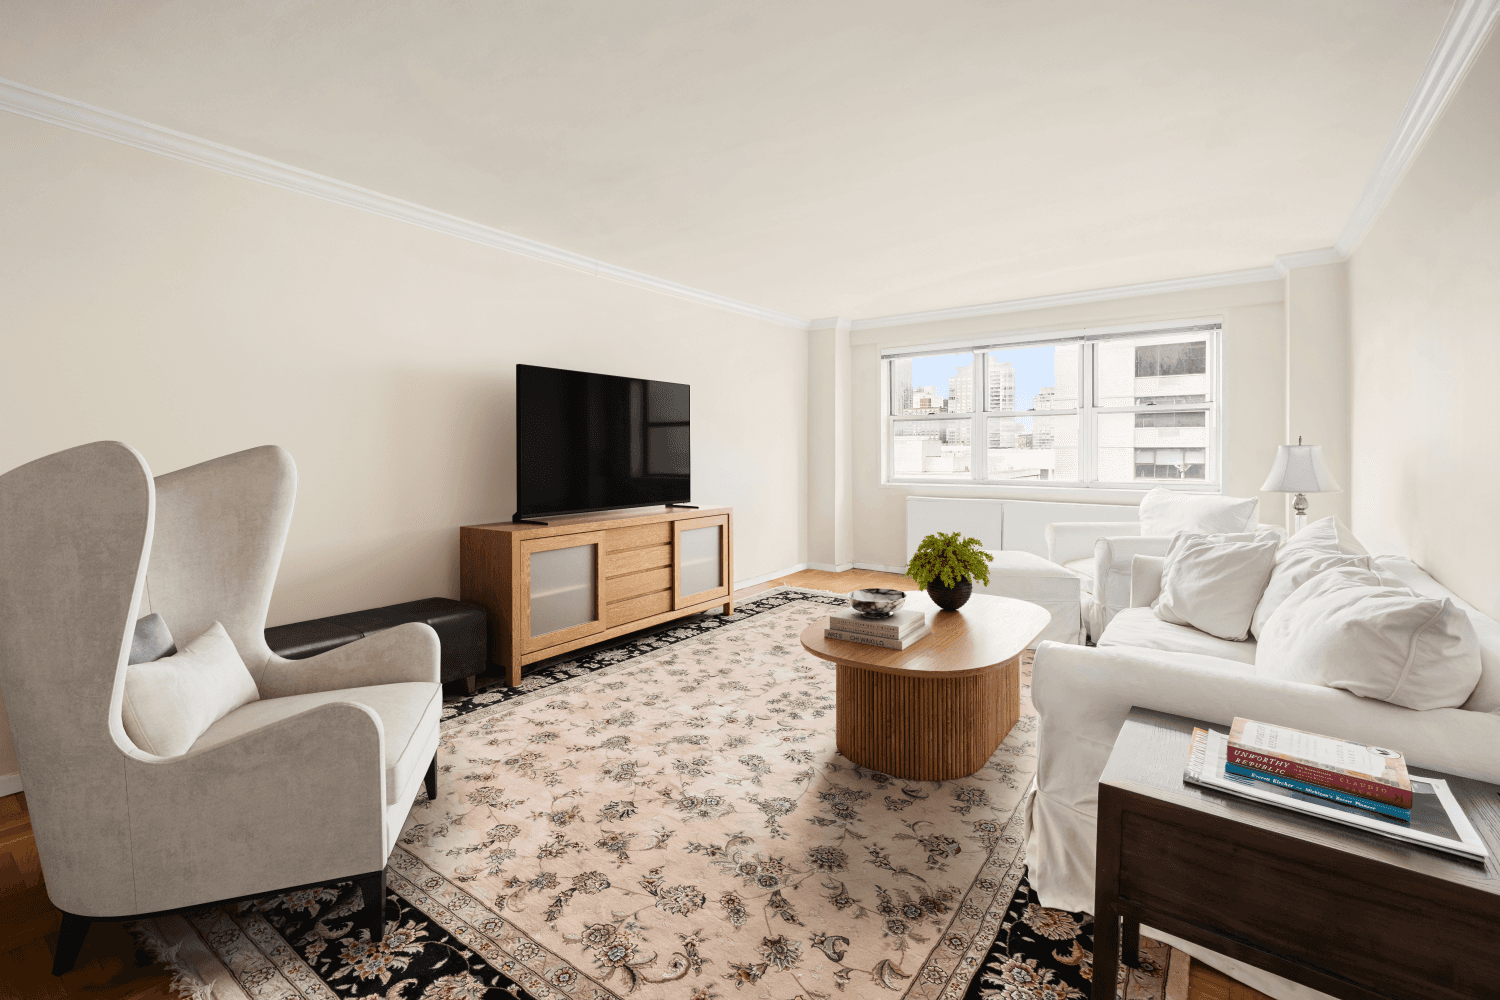 Welcome home to this bright and inviting two bedroom apartment with stunning open views of the Upper West Side skyline and landmarks, including Lincoln Center, Fordham University School of Law, ...